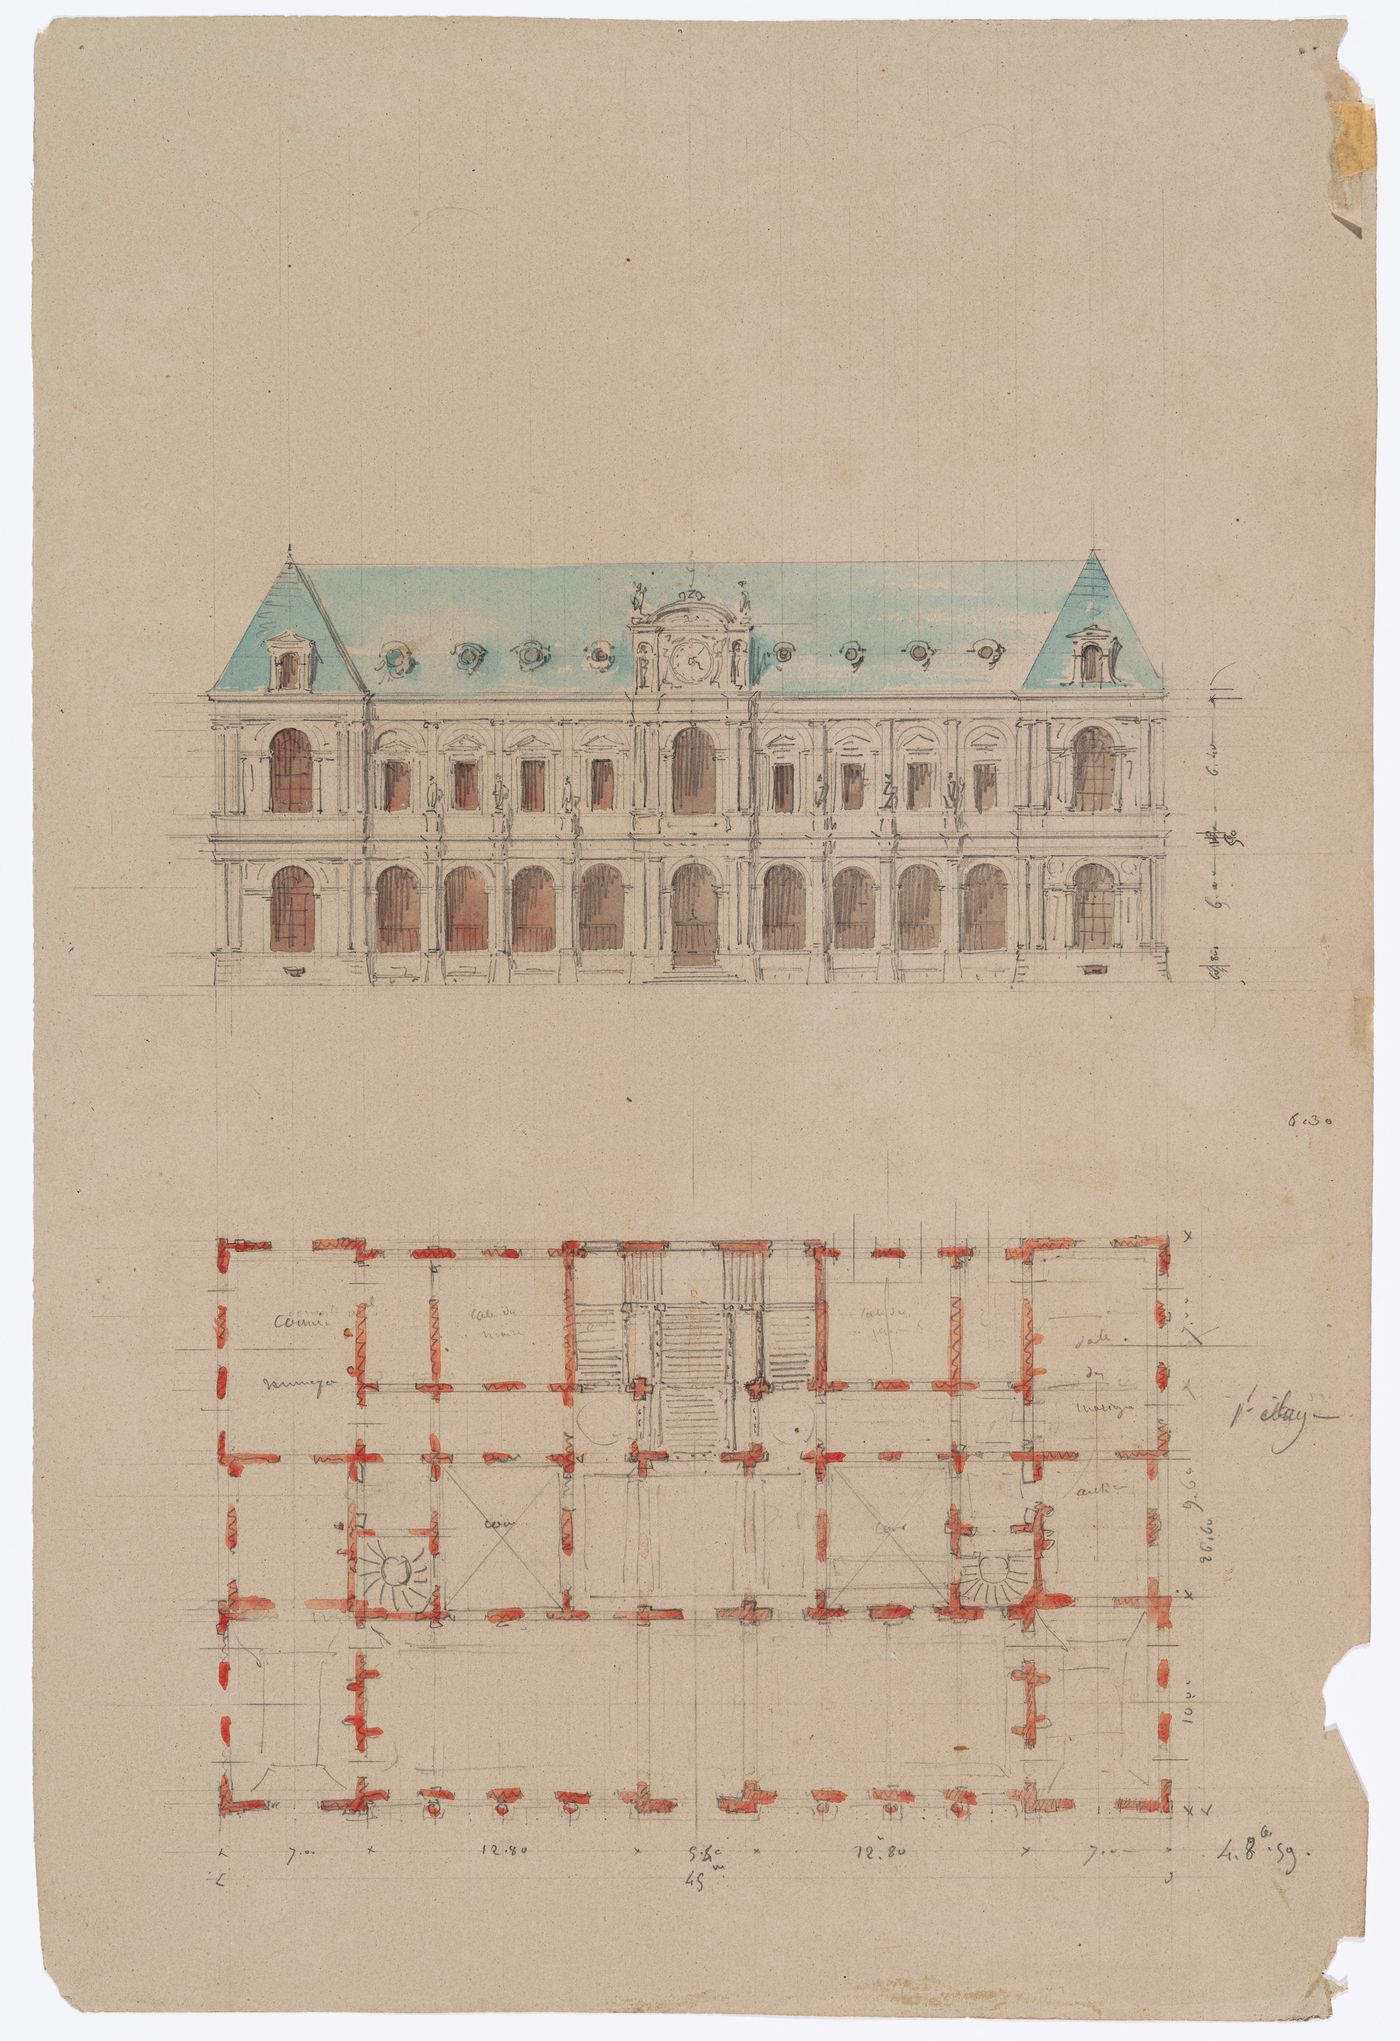 Project for a Hôtel de ville, Poitiers: Elevation and plan for the principal façade and first floor